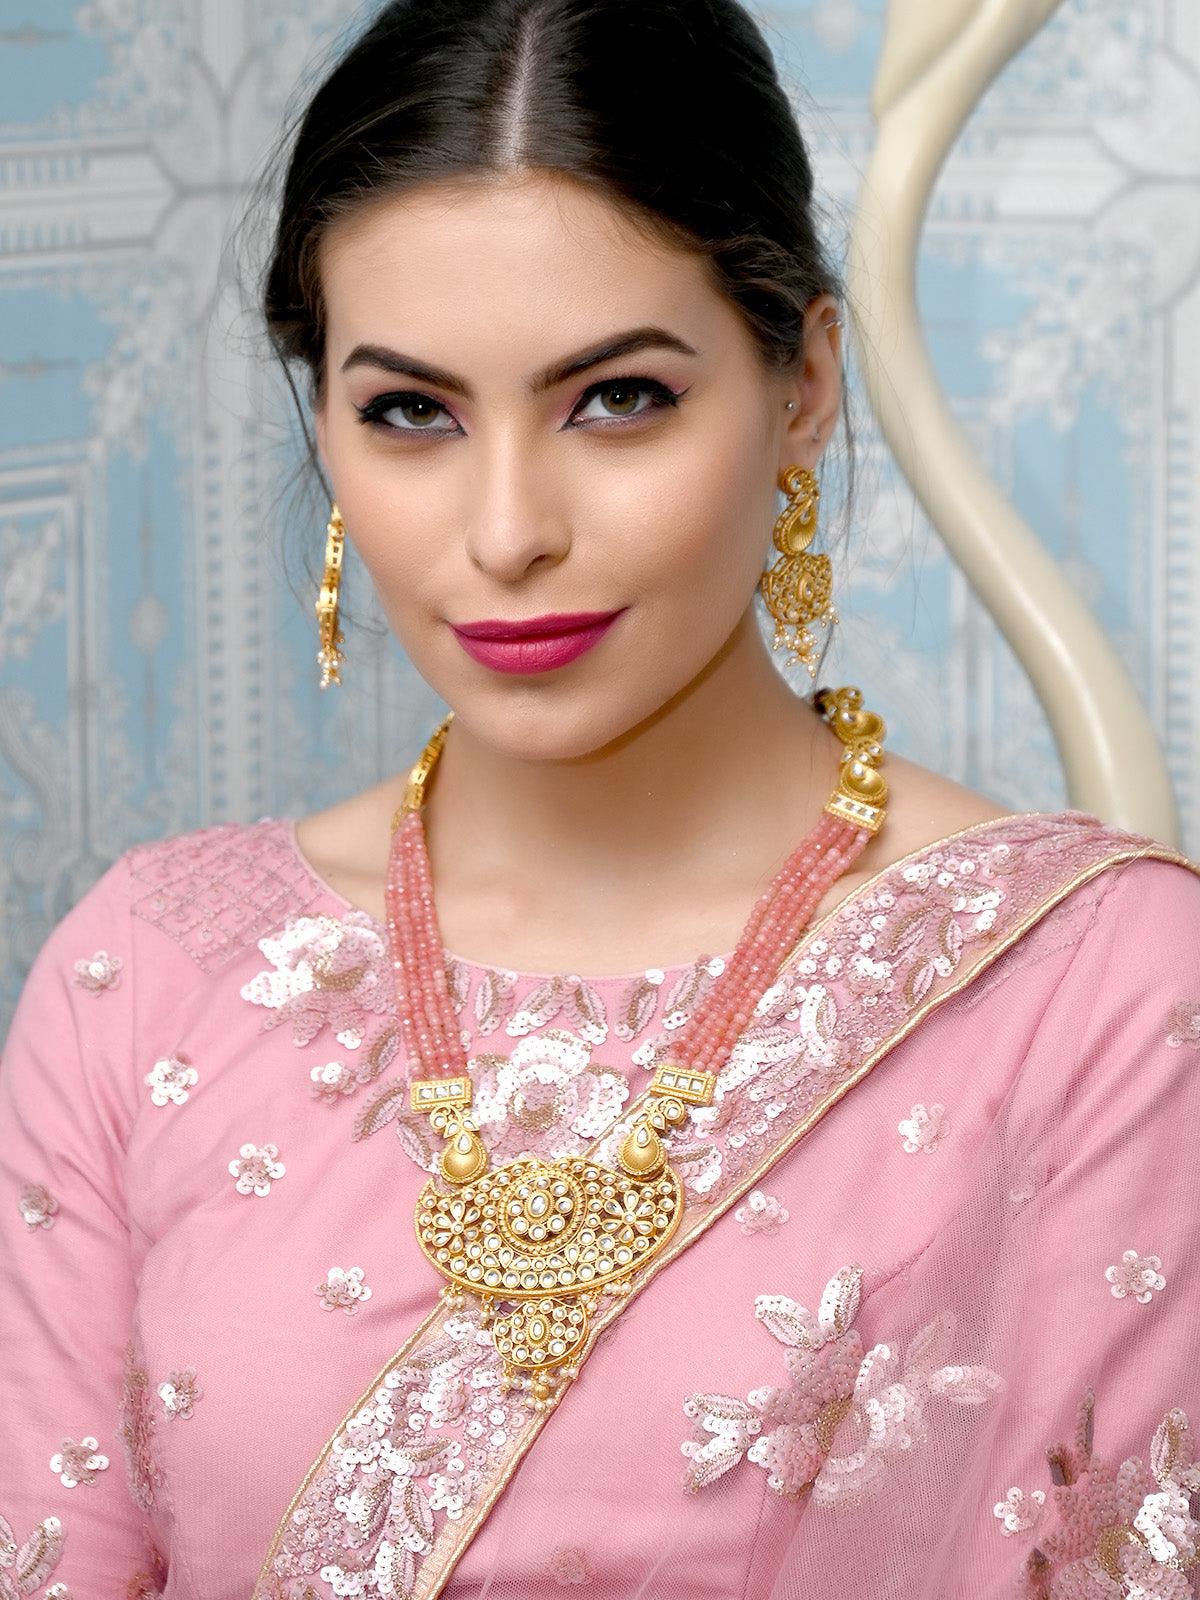 The Palakka Mala Jewellery Necklace Set - Traditional Gold Plated Jewel for  Traditional Indian Attire | Sasitrends